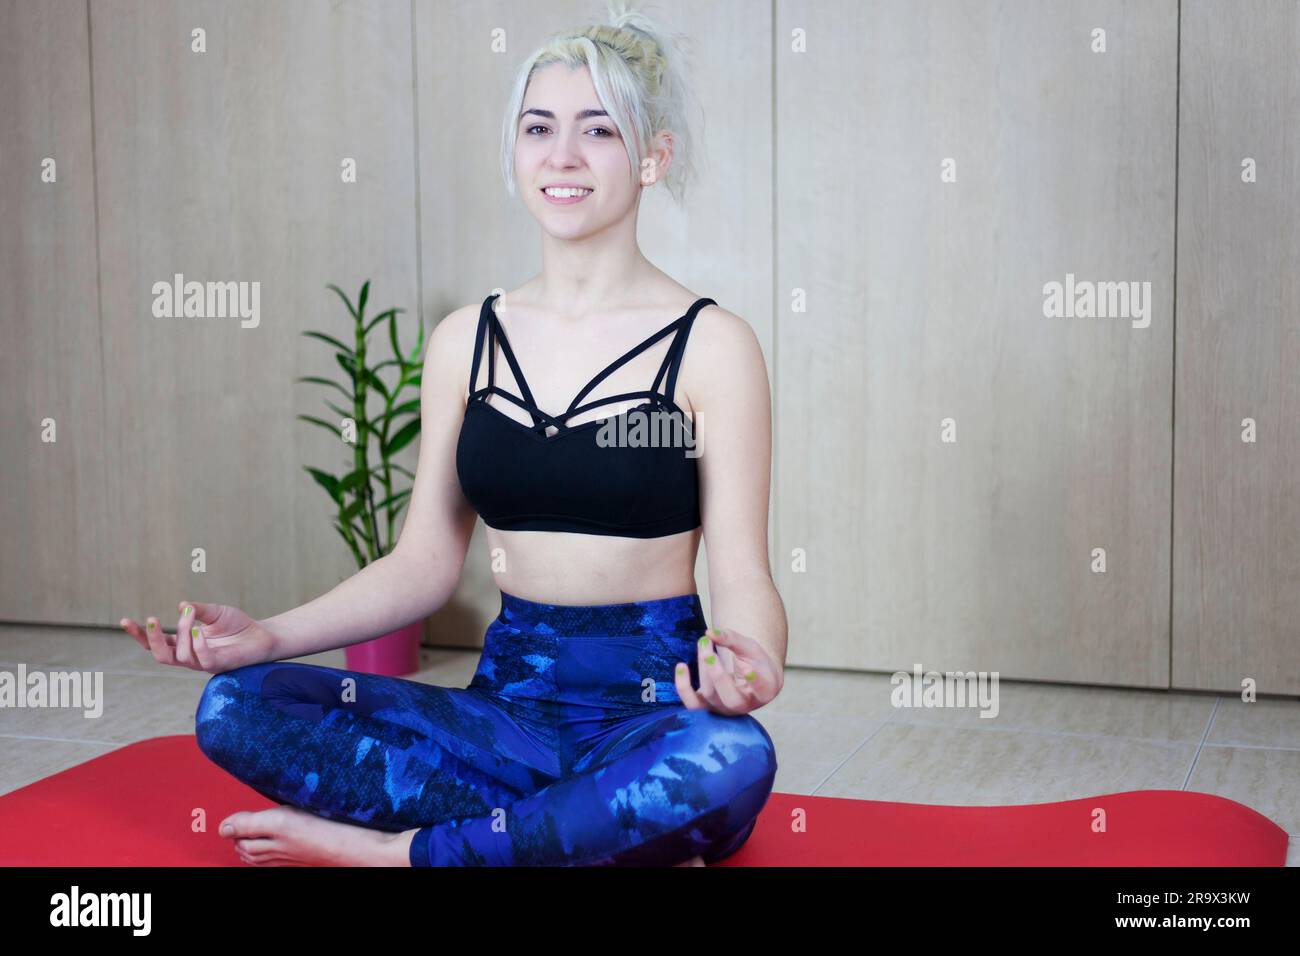 People, meditation and relaxation. Attractive smiling blonde woman wearing top and trousers sitting on fitness mat, Stock Photo